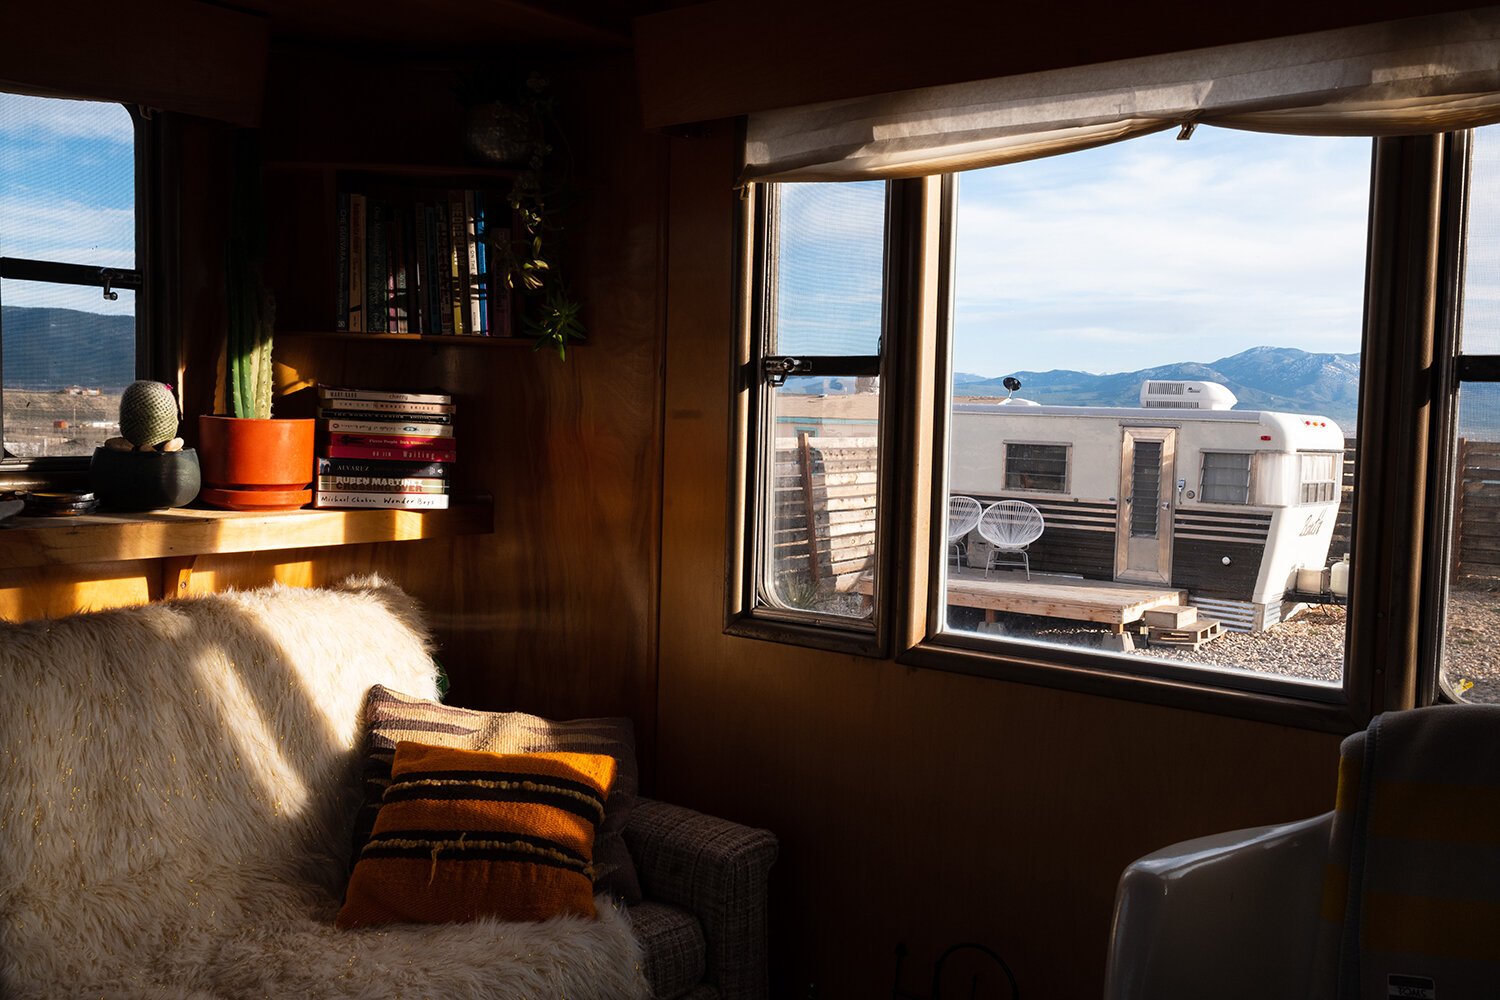 Travels and Curiosities - Vintage Trailer Airbnb New Mexico